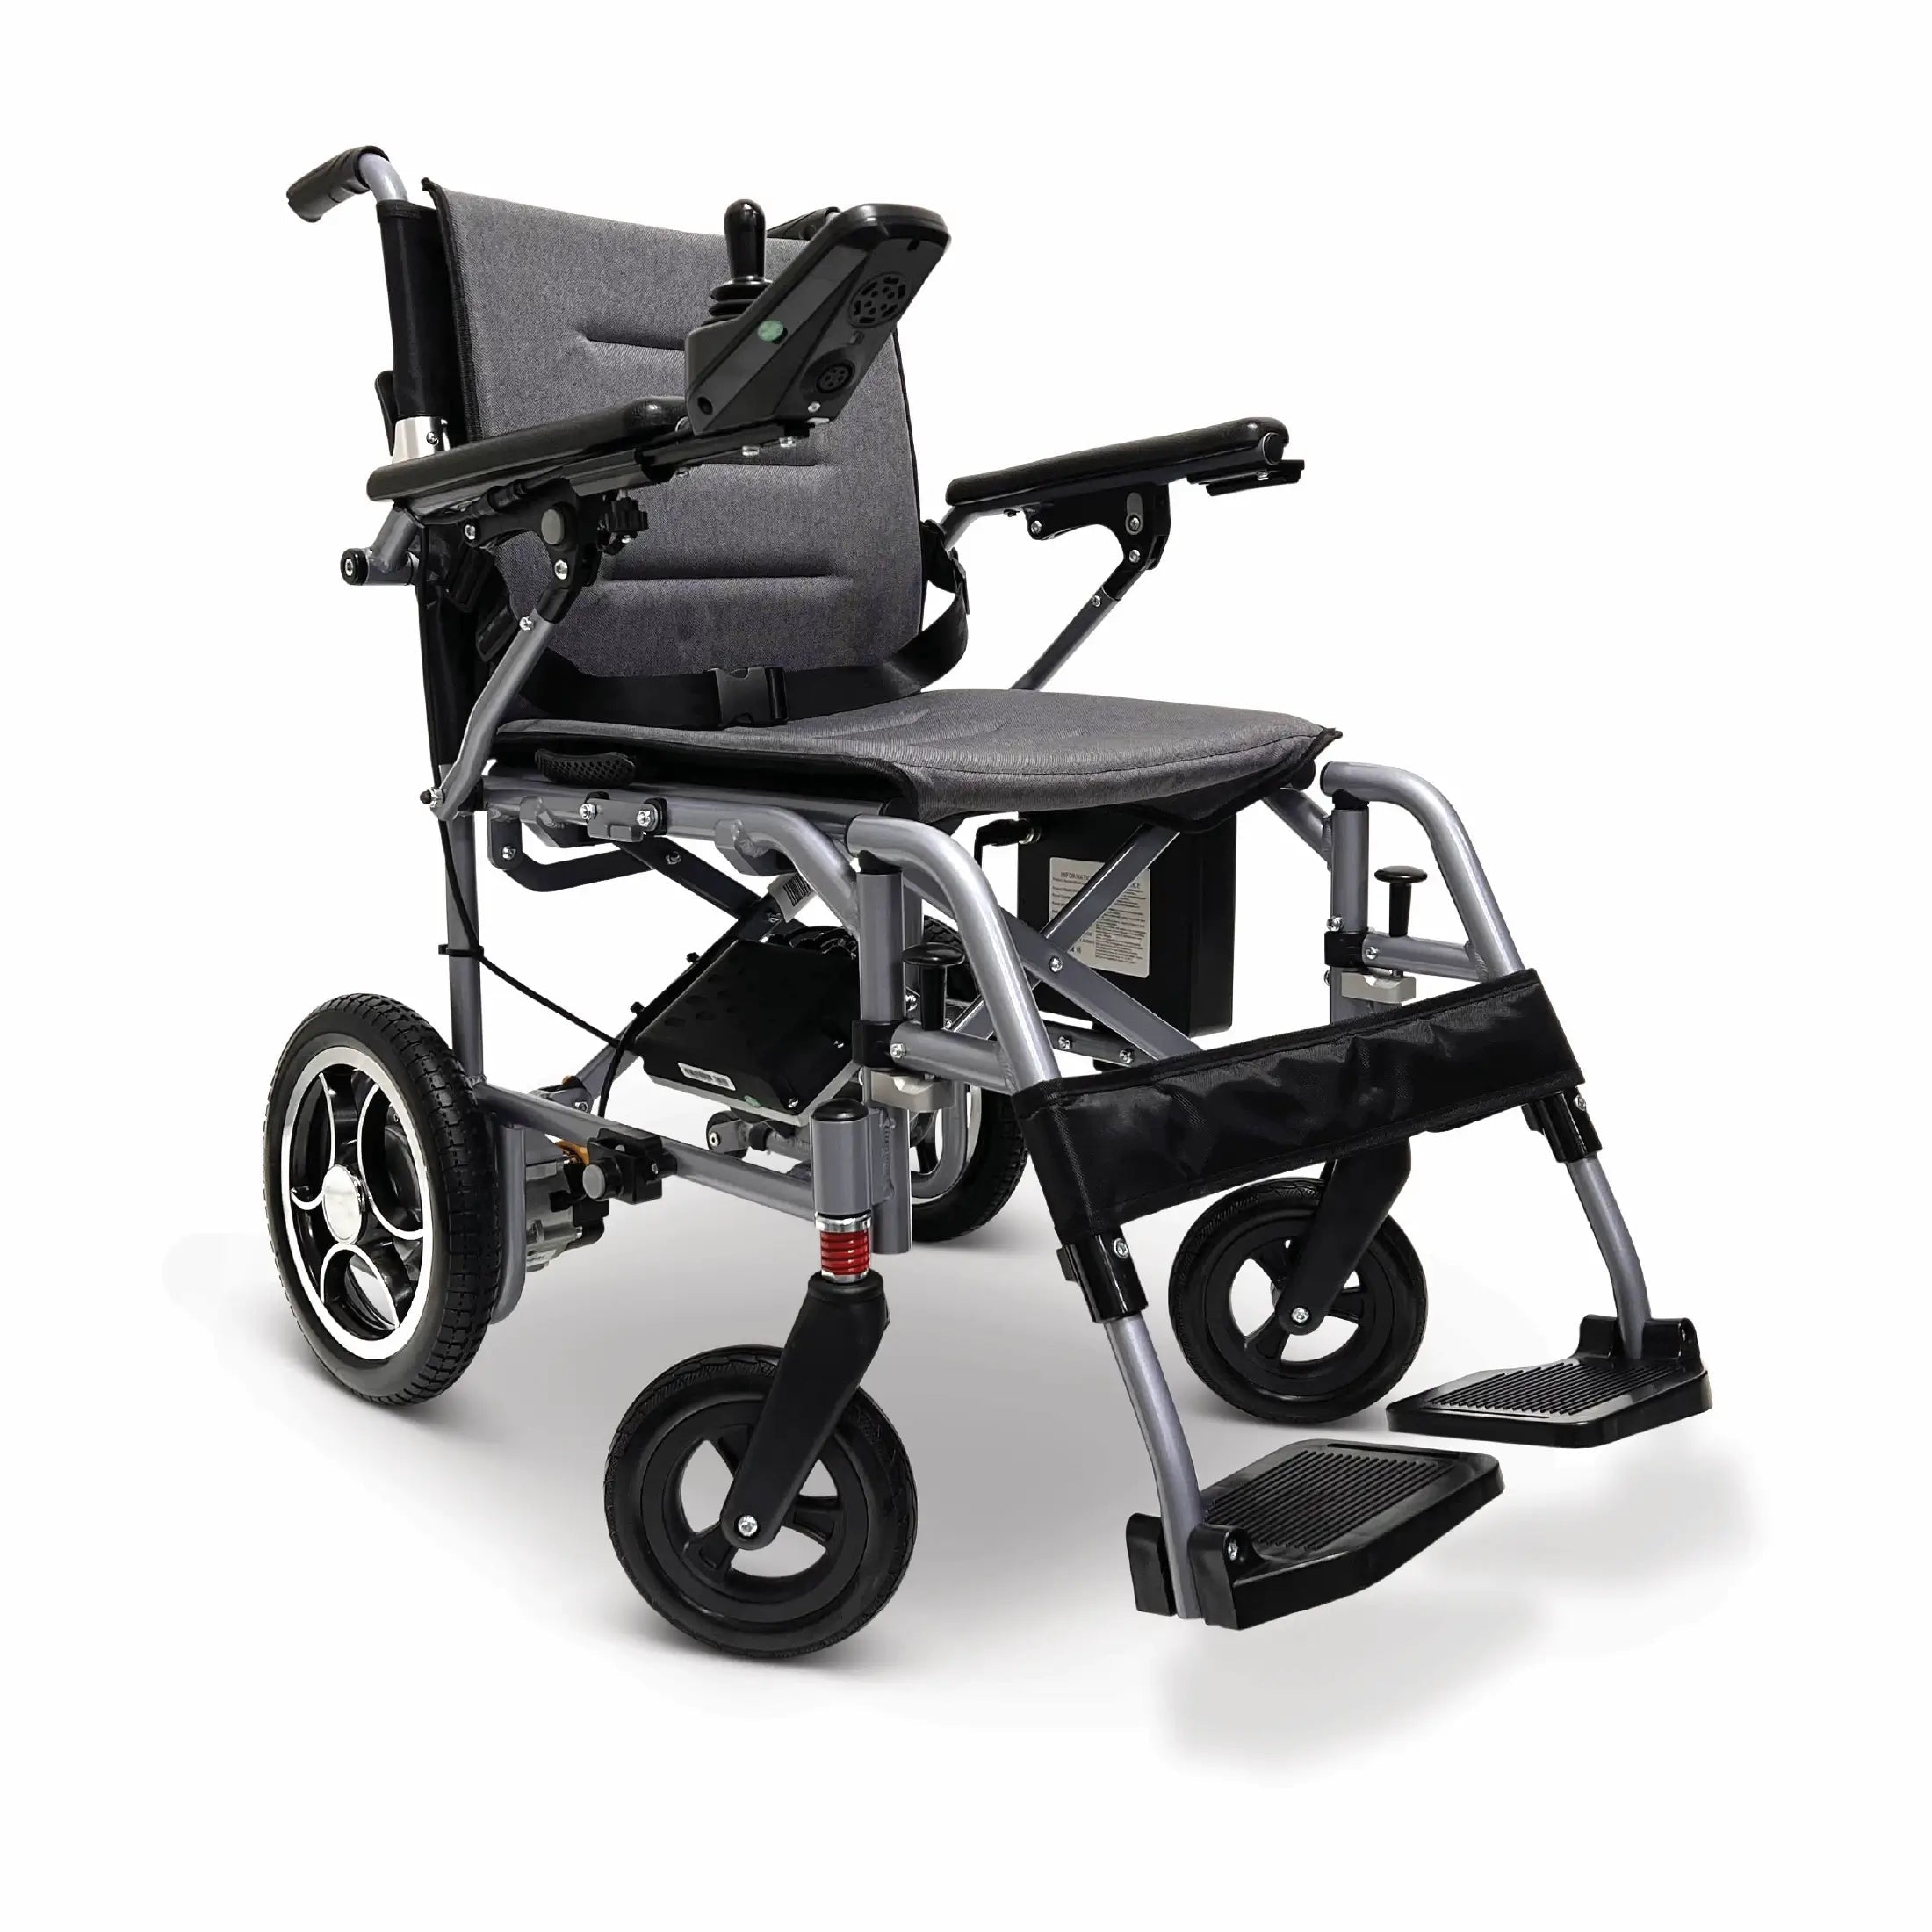 Zinger Chair - Portable and Folding, Weighs 48 lbs – Best Power